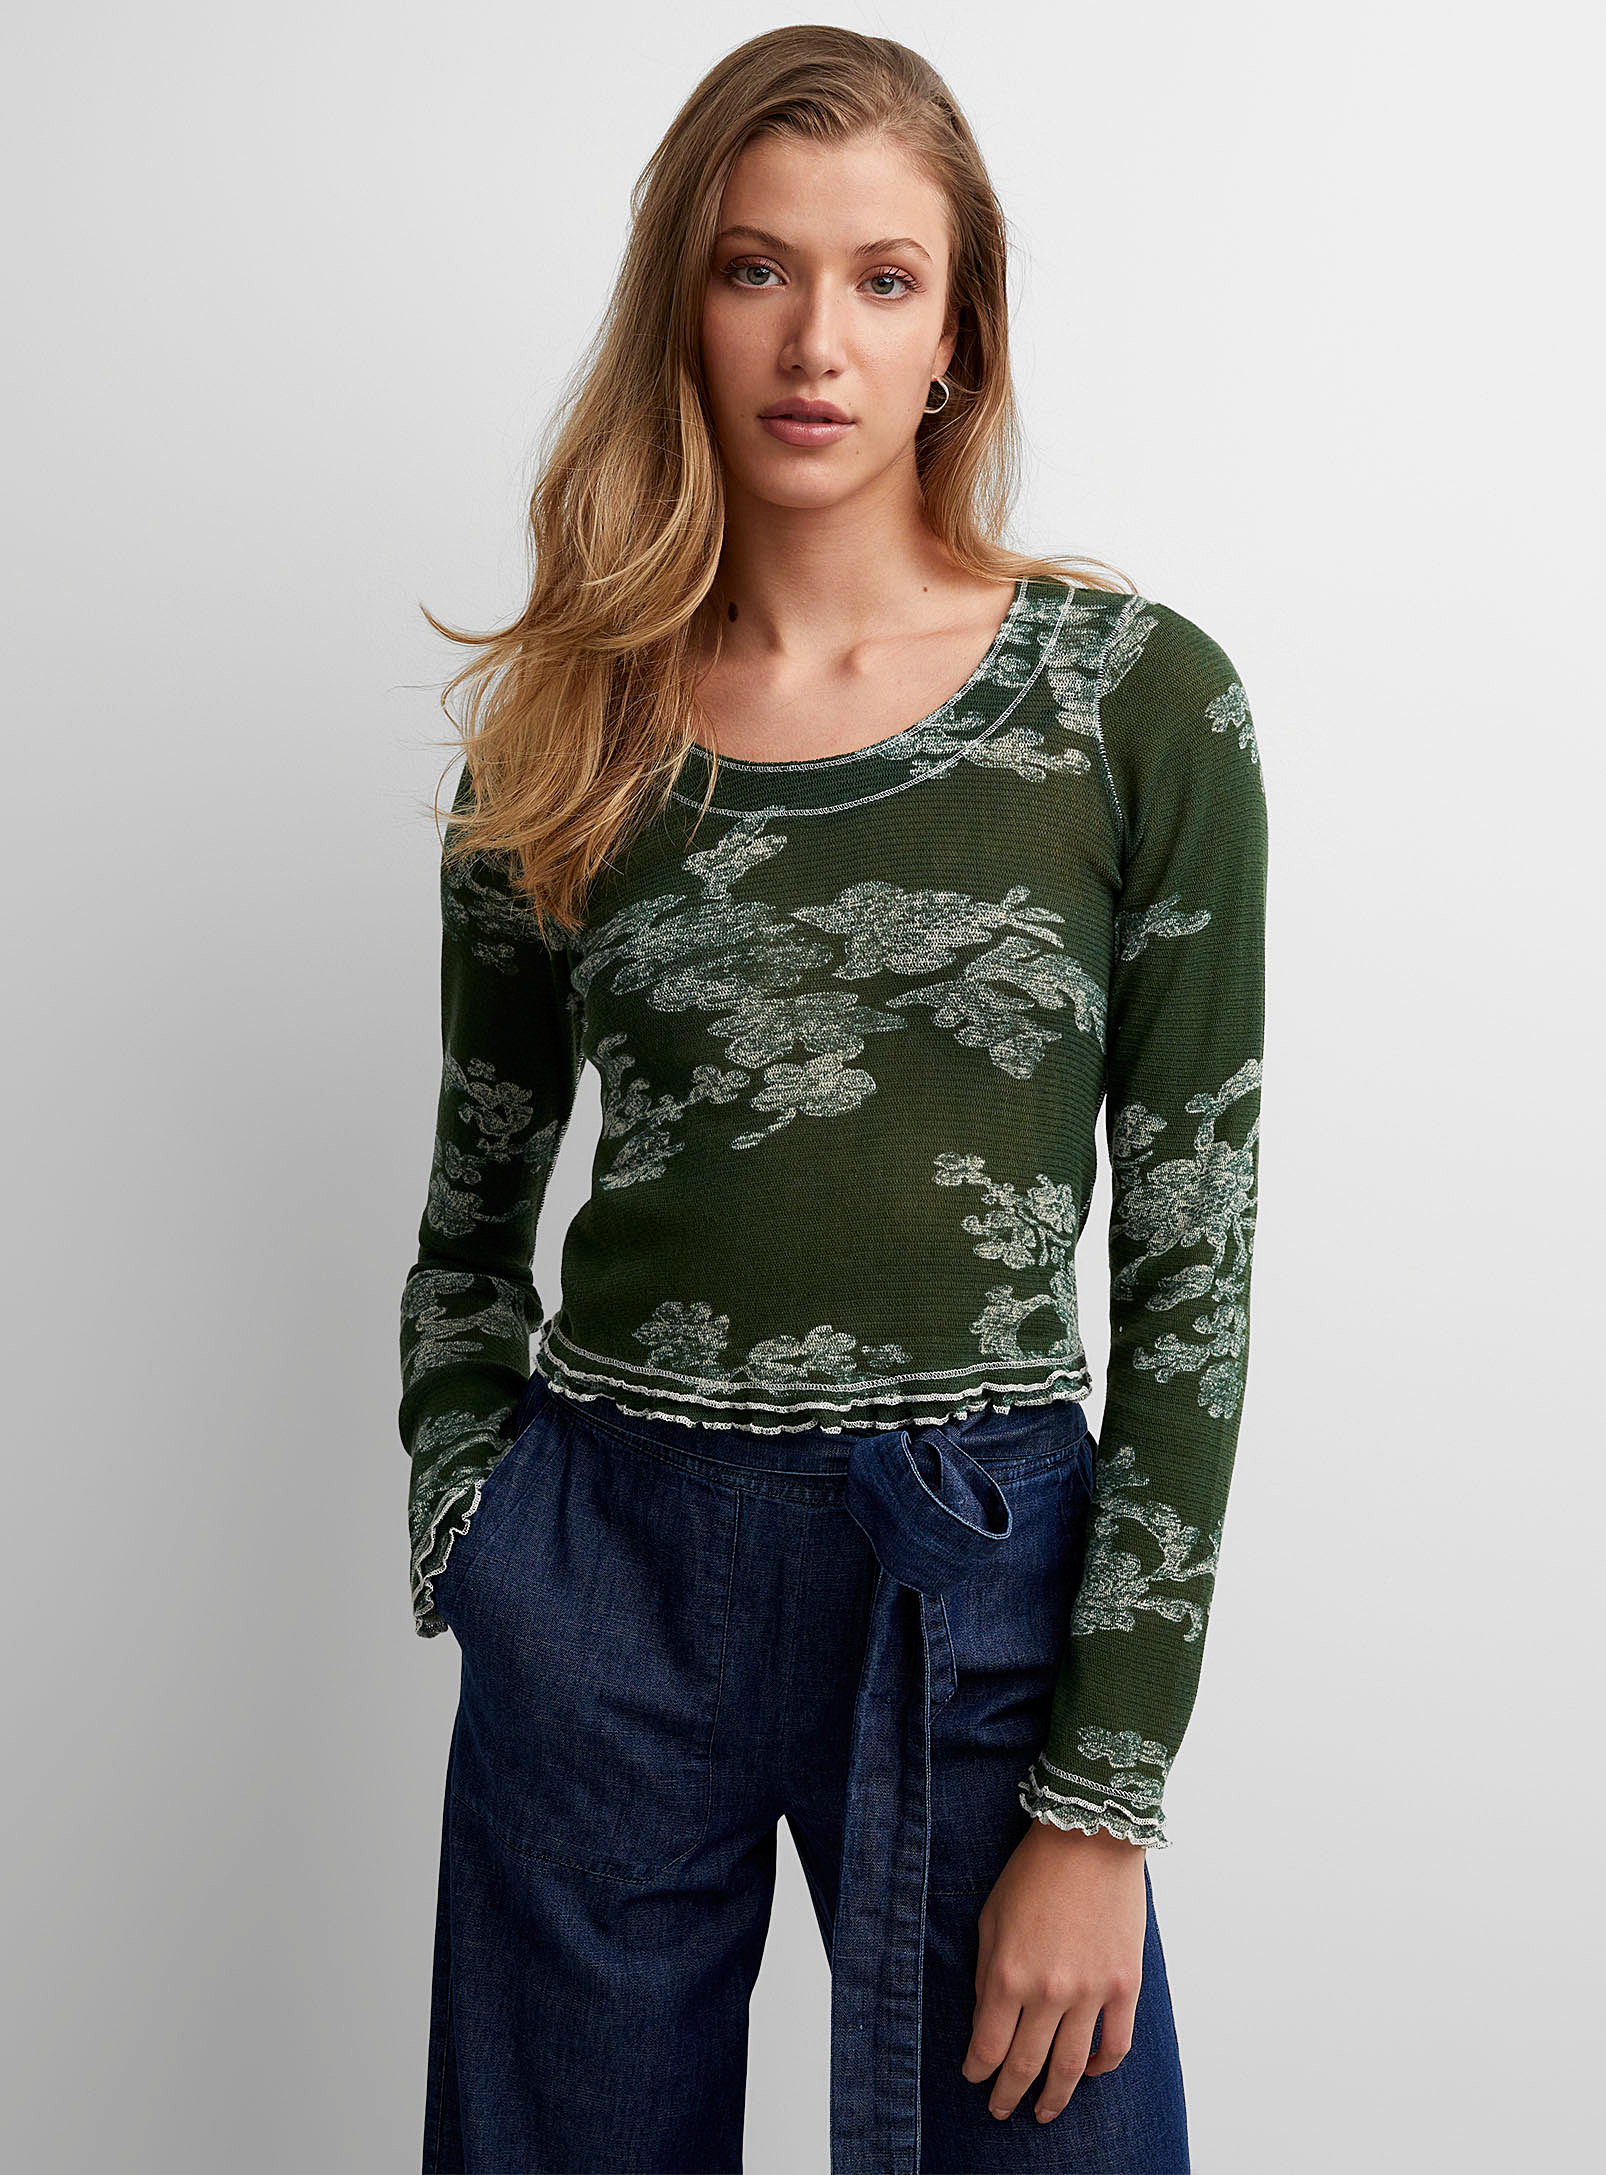 Free People Garner Forest Green Scalloped T-shirt In Patterned Green